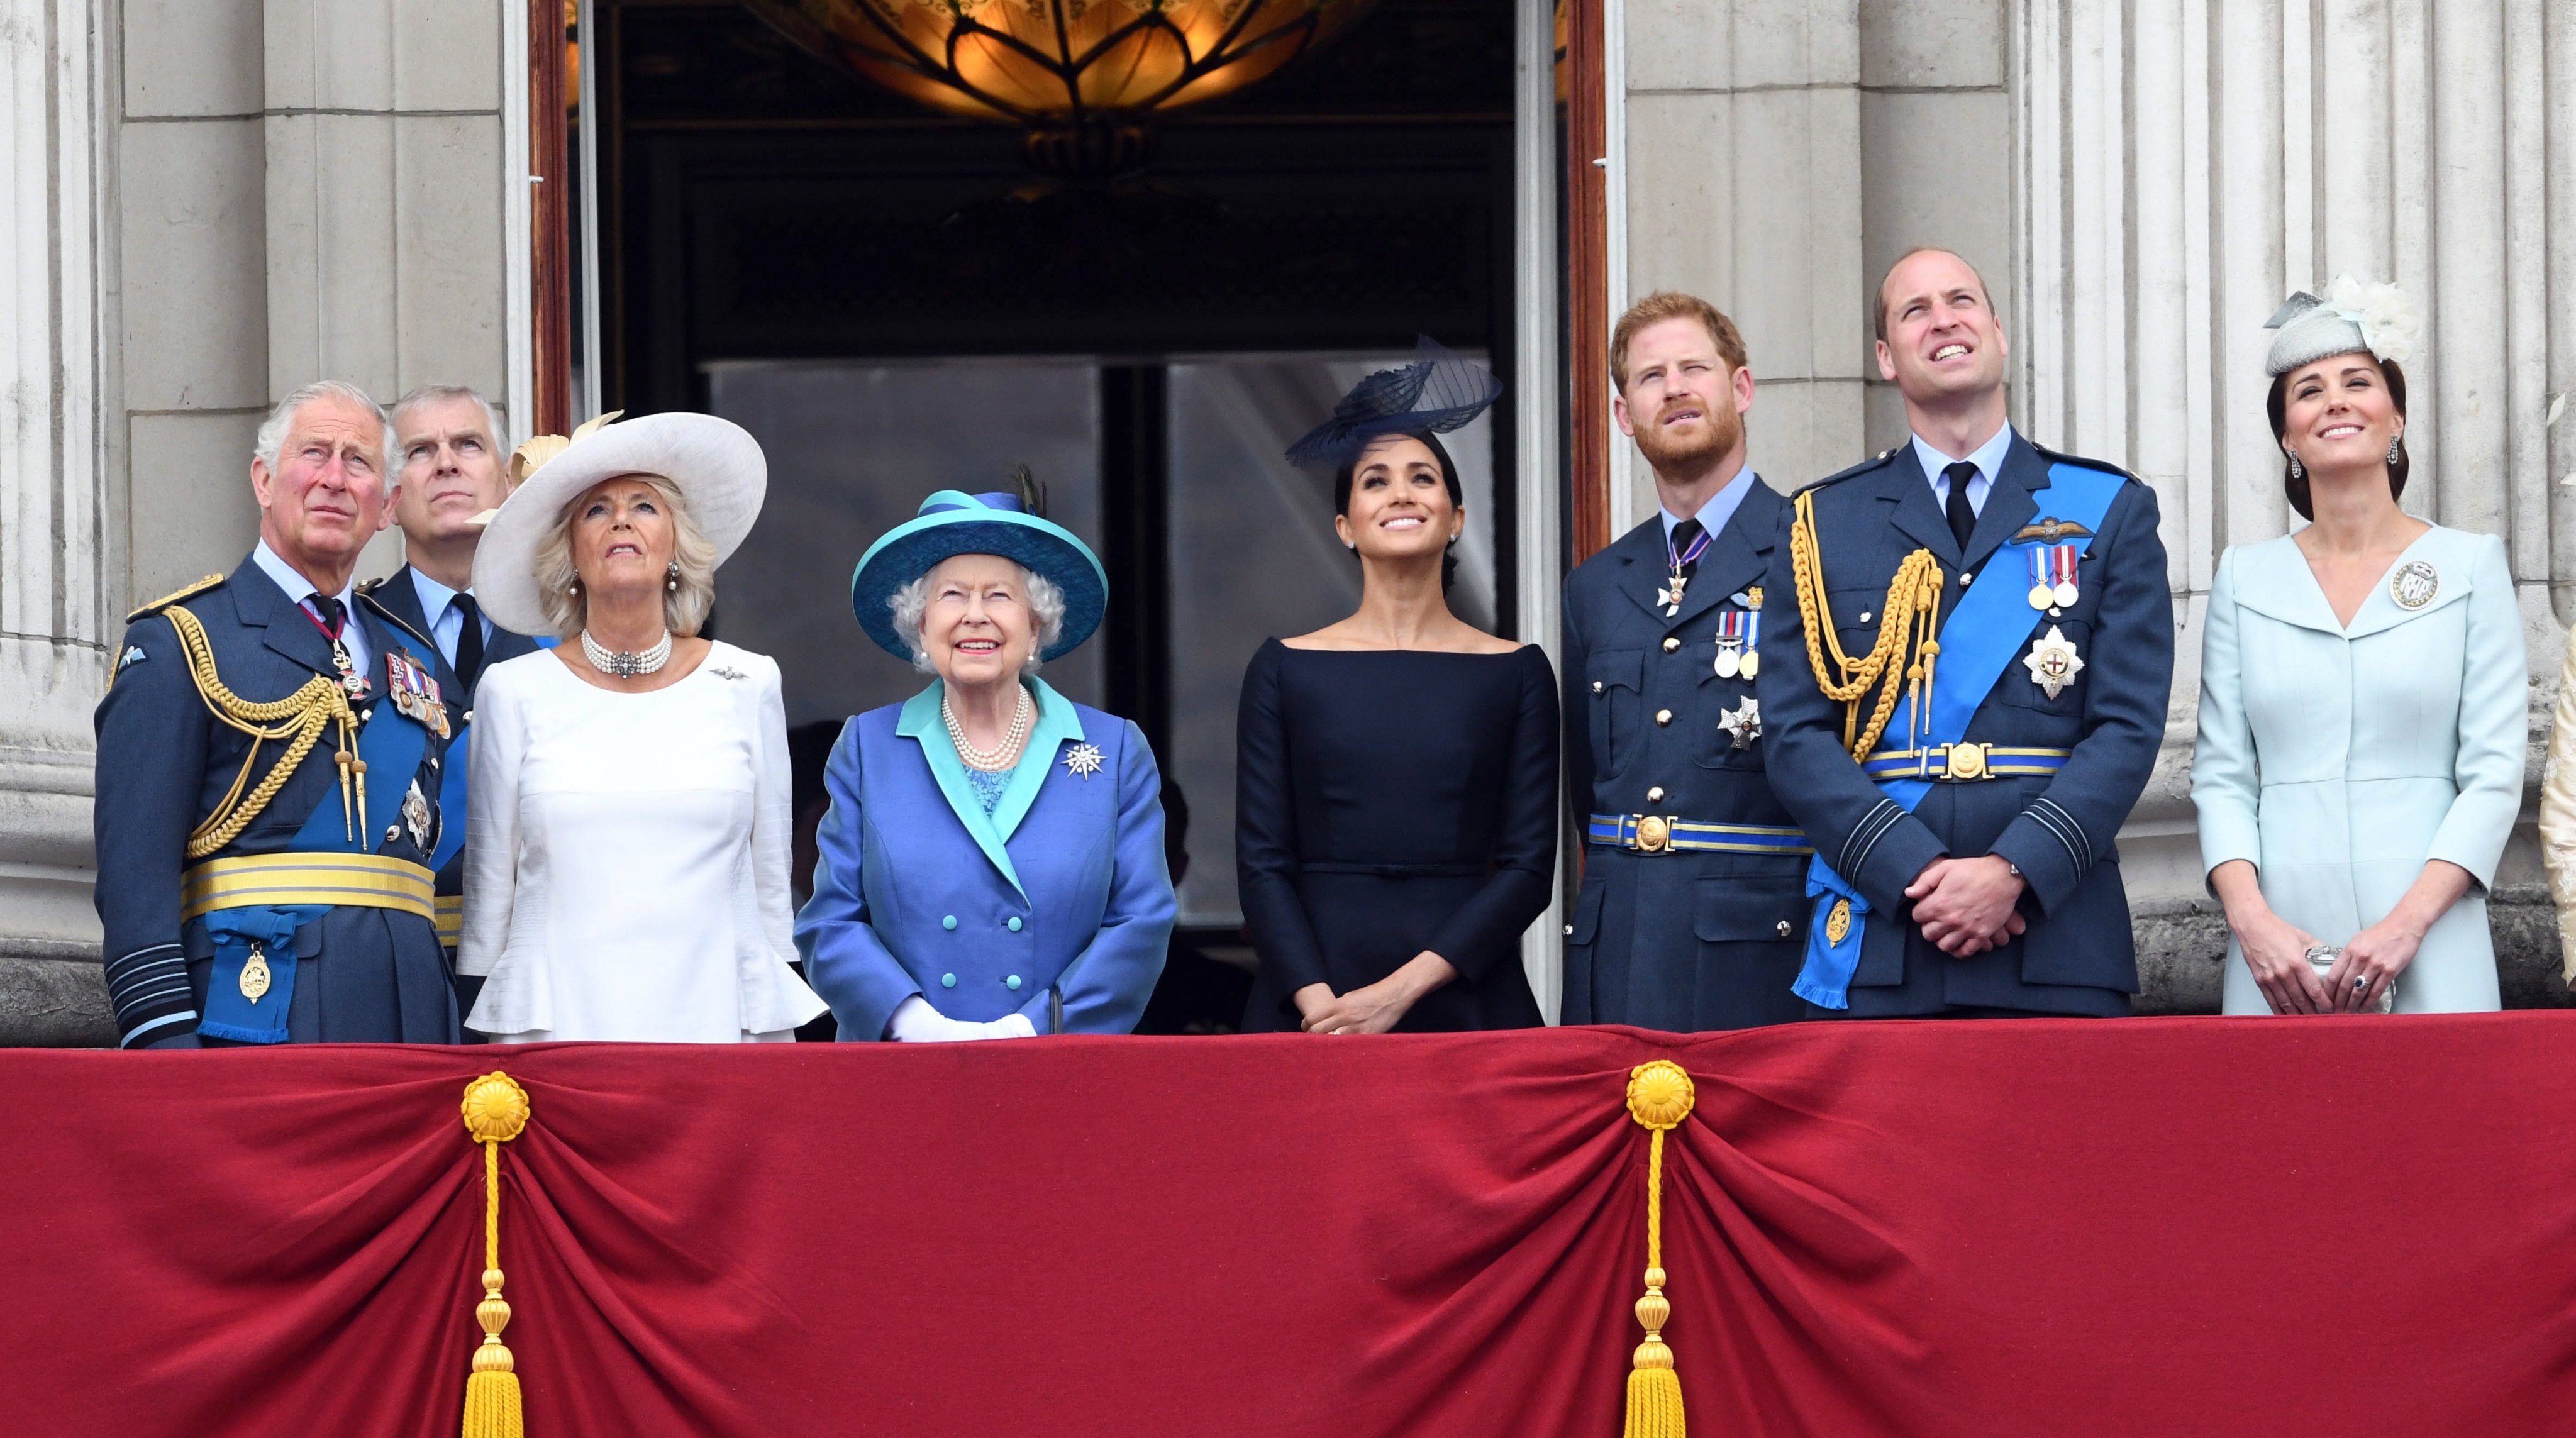 Where do the British royals get all their money from and how much are they worth? Photo: EPA-EFE